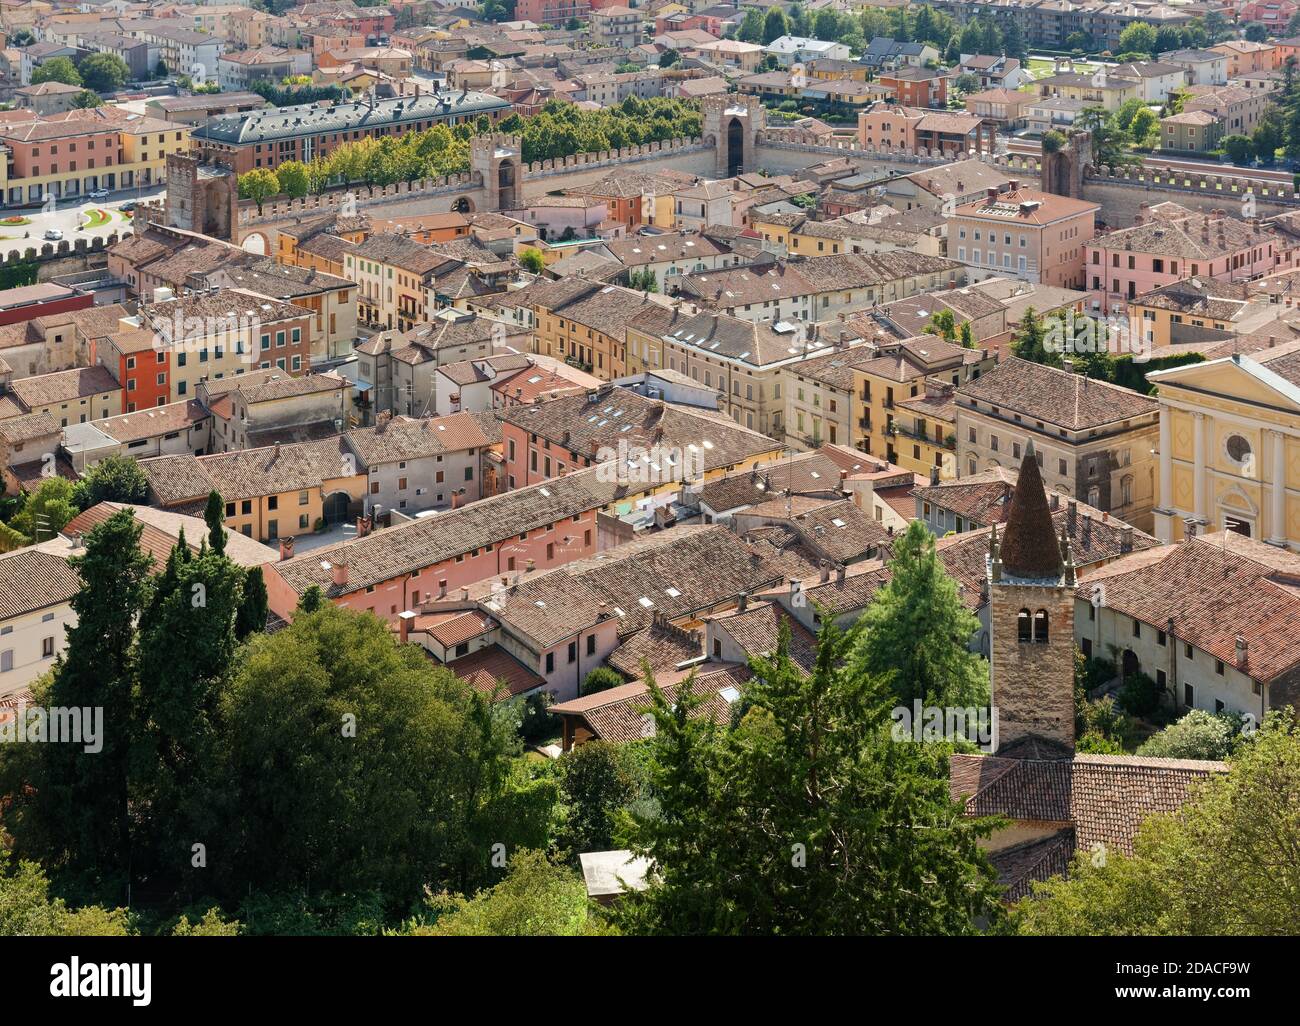 Panoramic view of the old town Soave, Italy, with its medieval walls Stock Photo